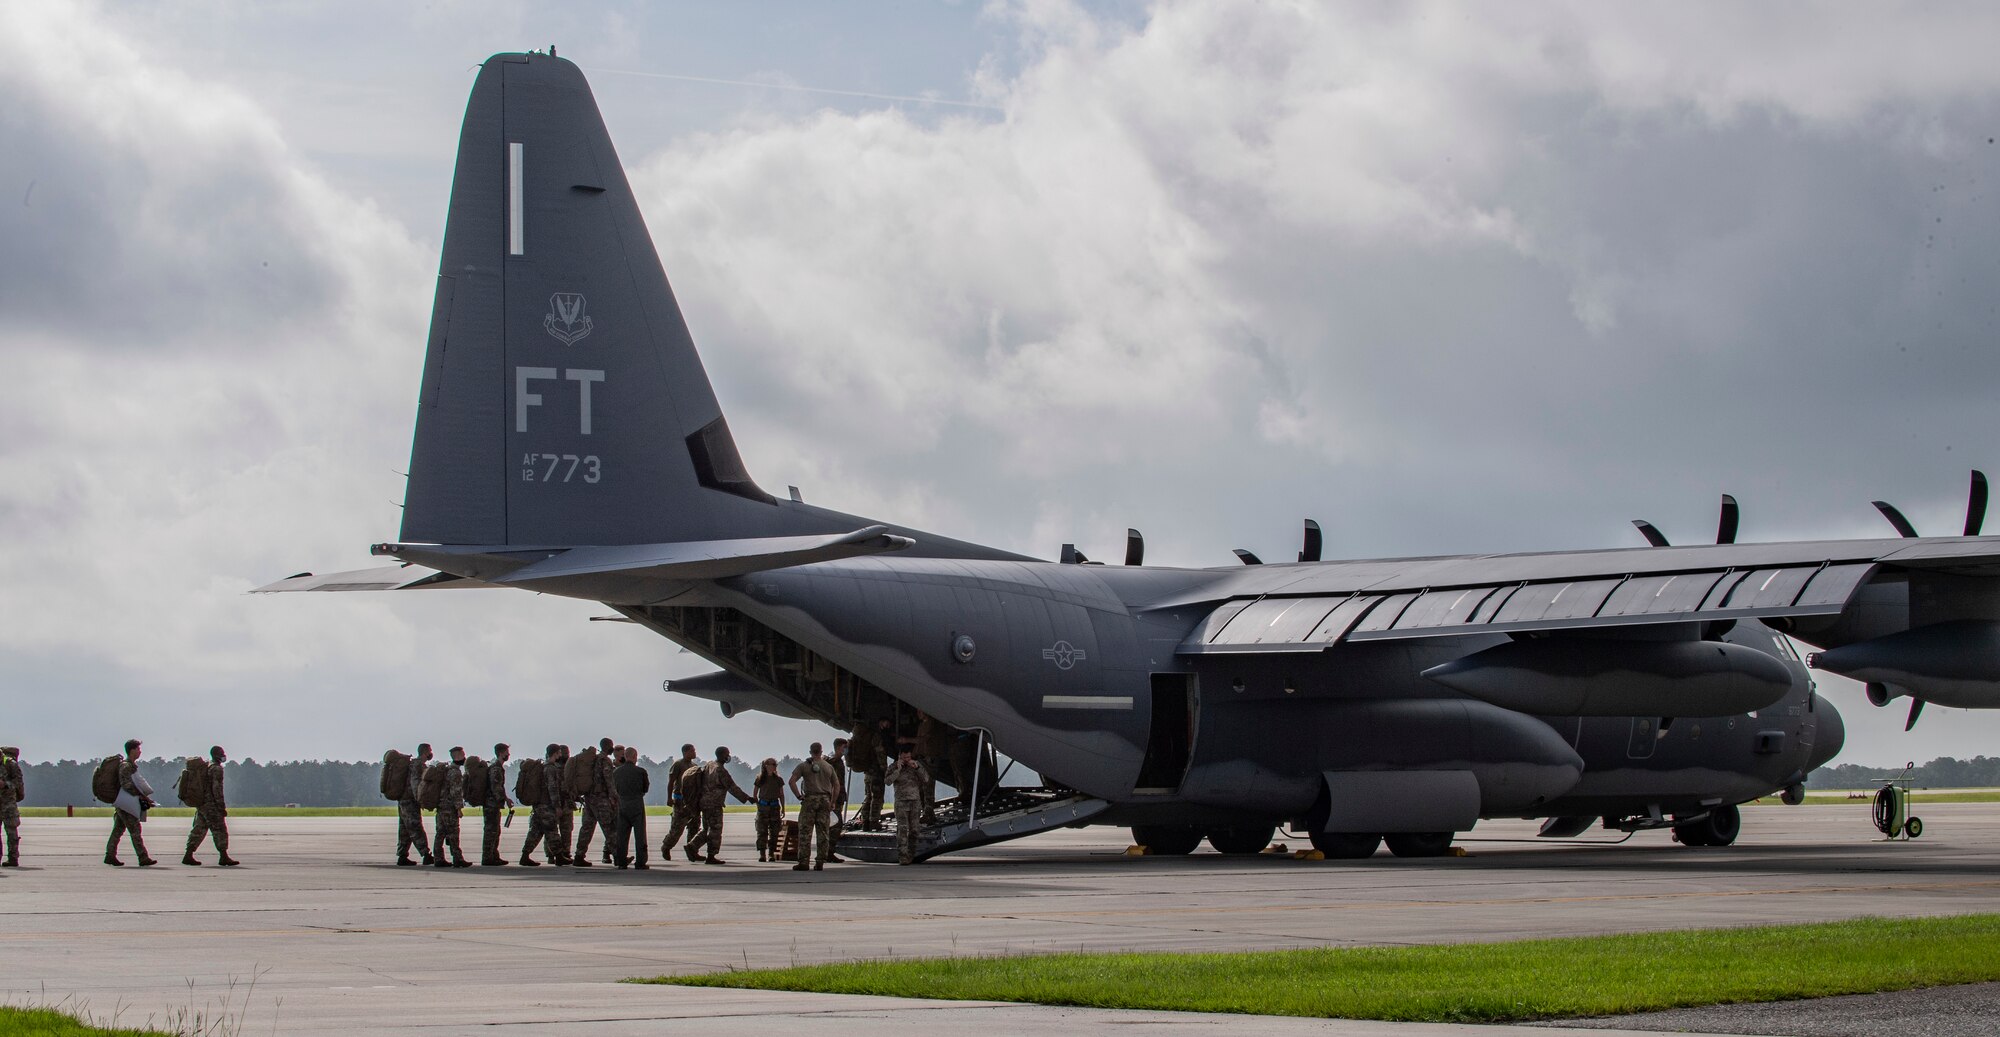 U.S. Air Force Airmen from the 822nd Base Defense Squadron load into an HC-130J Combat King II cargo aircraft from the 71st Rescue Squadron at Moody Air Force Base, Georgia, Aug. 29, 2021. More than 160 Airmen were transported to Holloman Air Force Base, New Mexico, in support of Task Force – Holloman. The Department of Defense, through U.S. Northern Command, and in support of the Department of Homeland Security, is providing transportation, temporary housing, medical screening, and general support for at least 50,000 Afghan evacuees at suitable facilities, in permanent or temporary structures, as quickly as possible. This initiative provides Afghan personnel essential support at secure locations outside Afghanistan. (U.S. Air Force photo by Master Sgt. Daryl Knee)